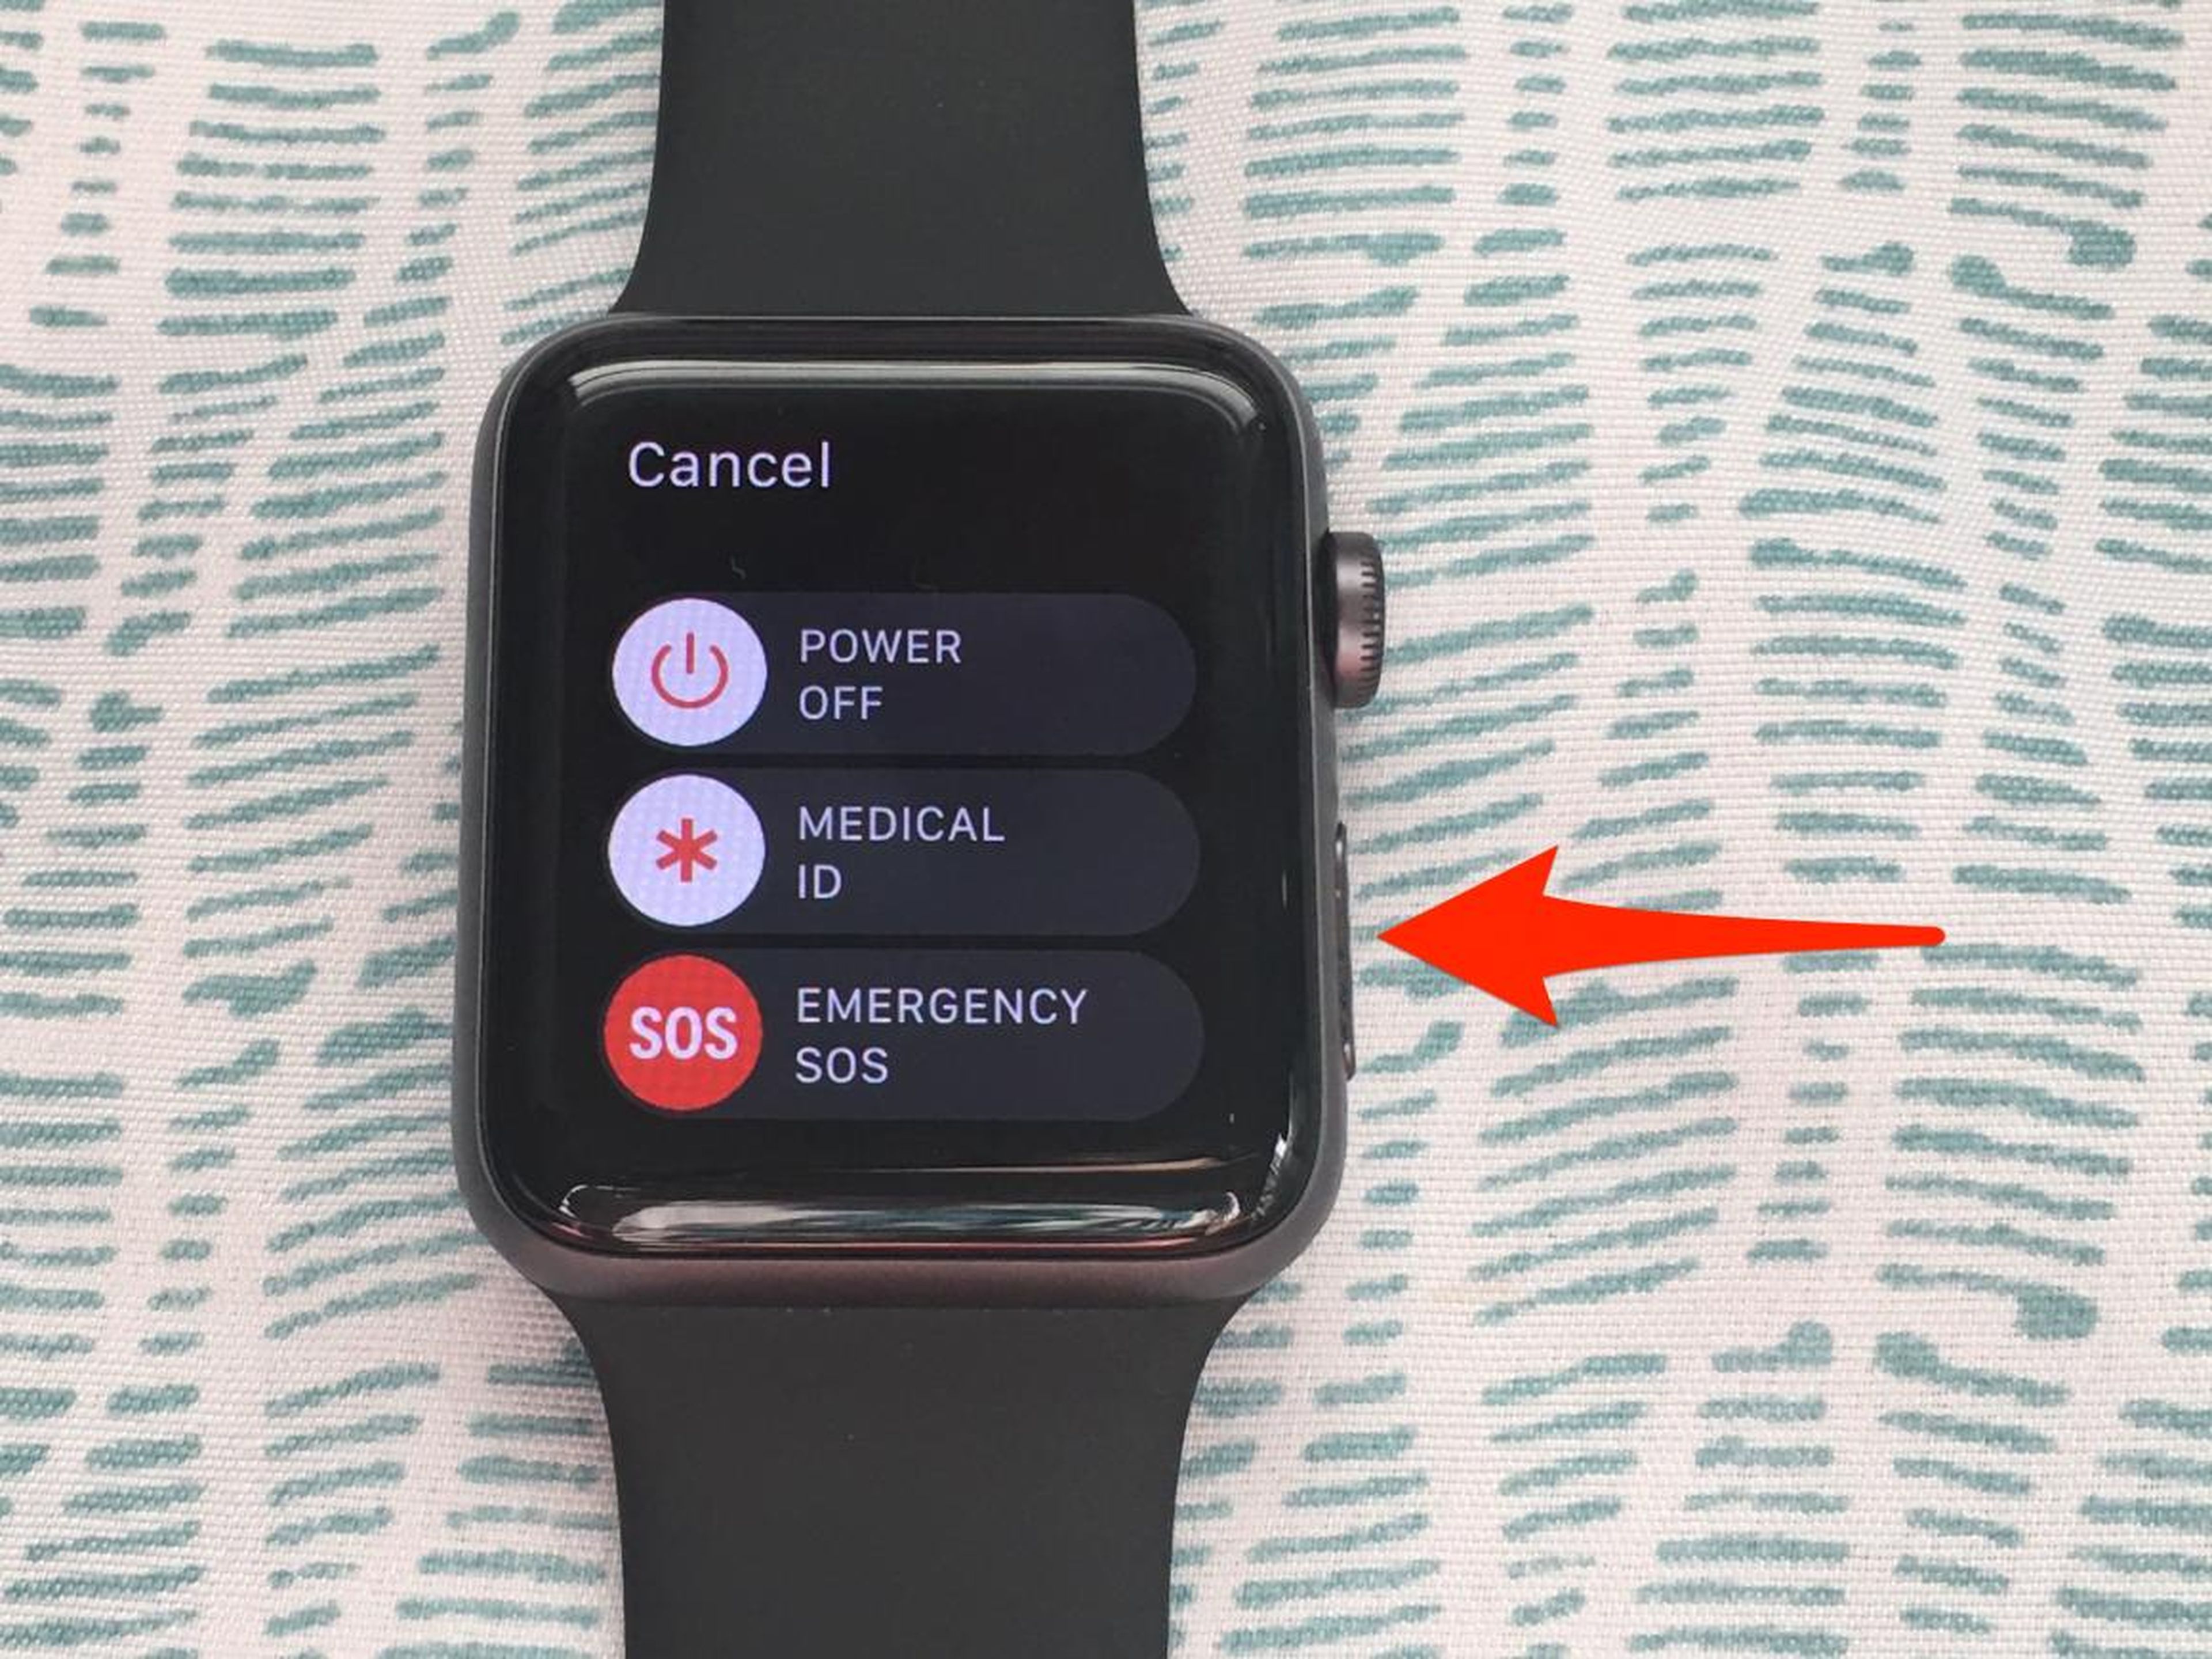 A hiker says his Apple Watch saved his life by calling 911 after he fell off a cliff